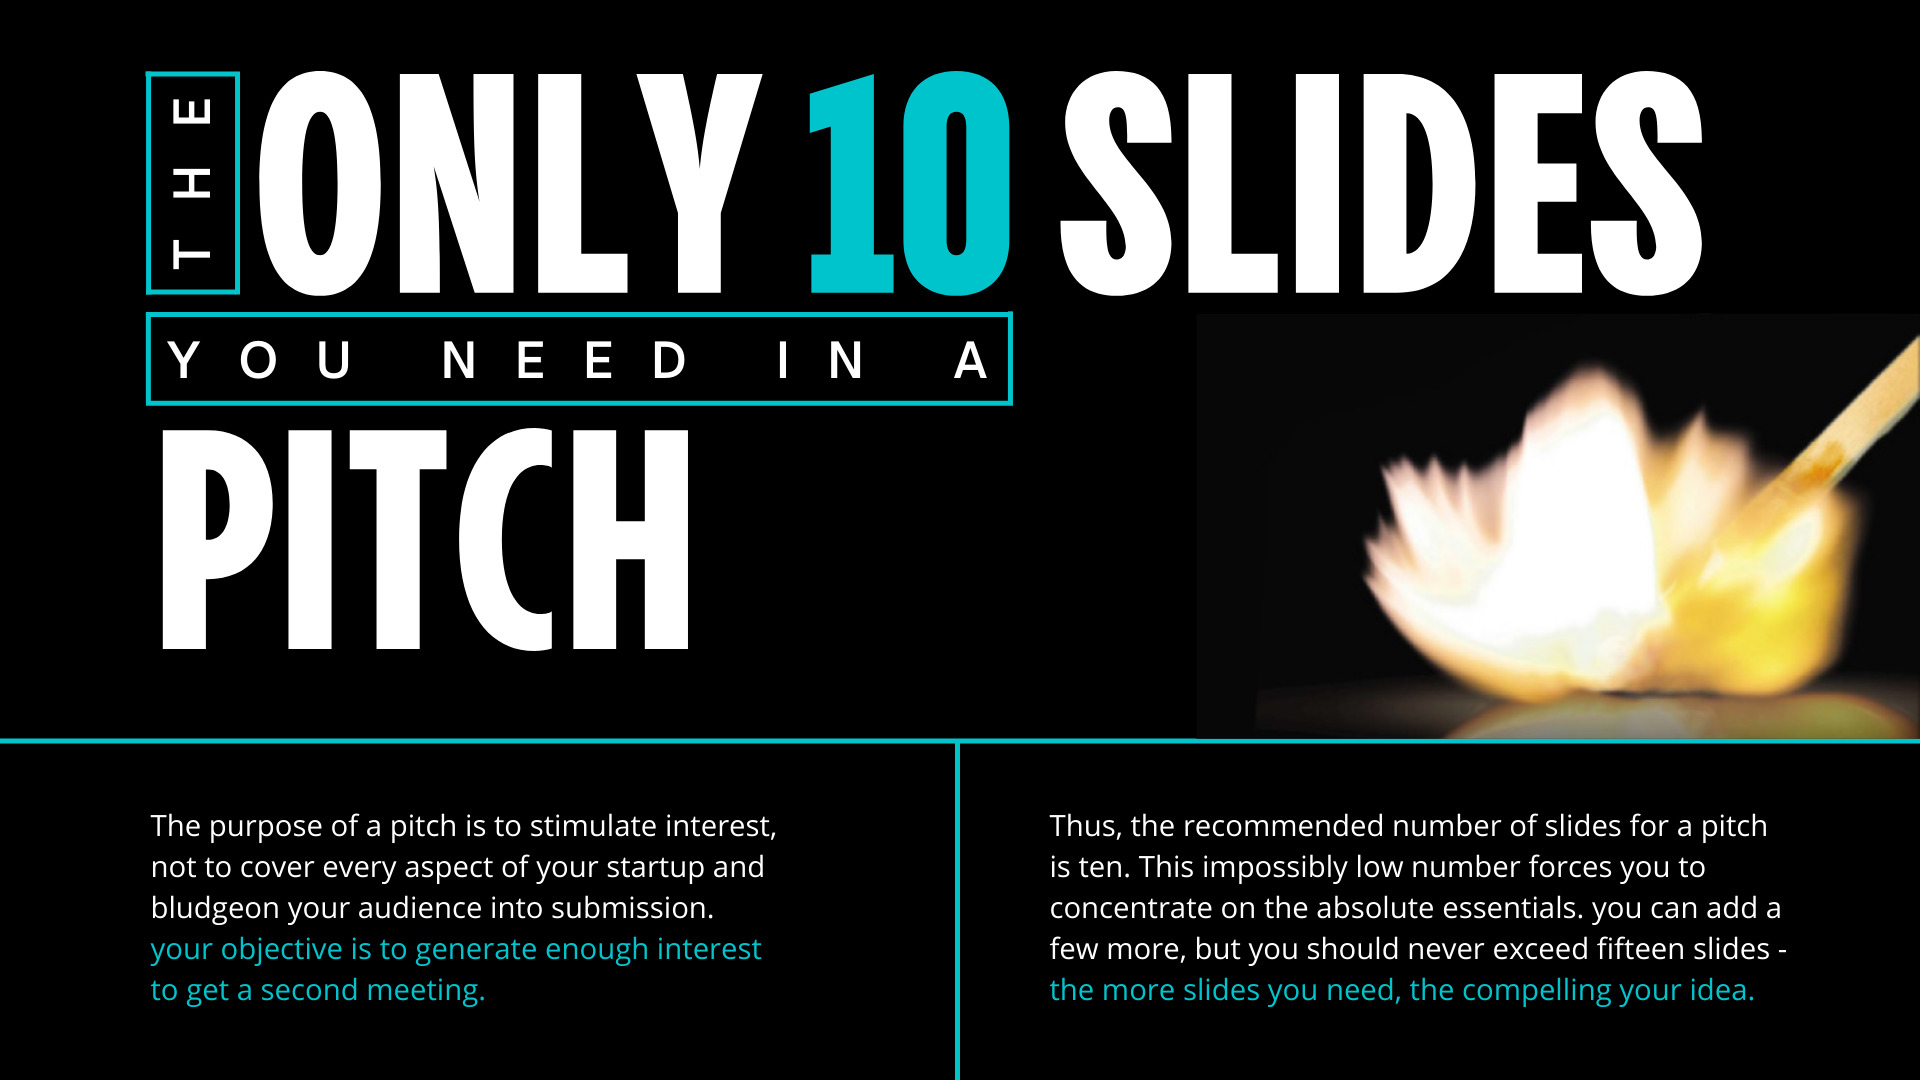 The Only 10 Slides You Need in Your Pitch Guy Kawasaki